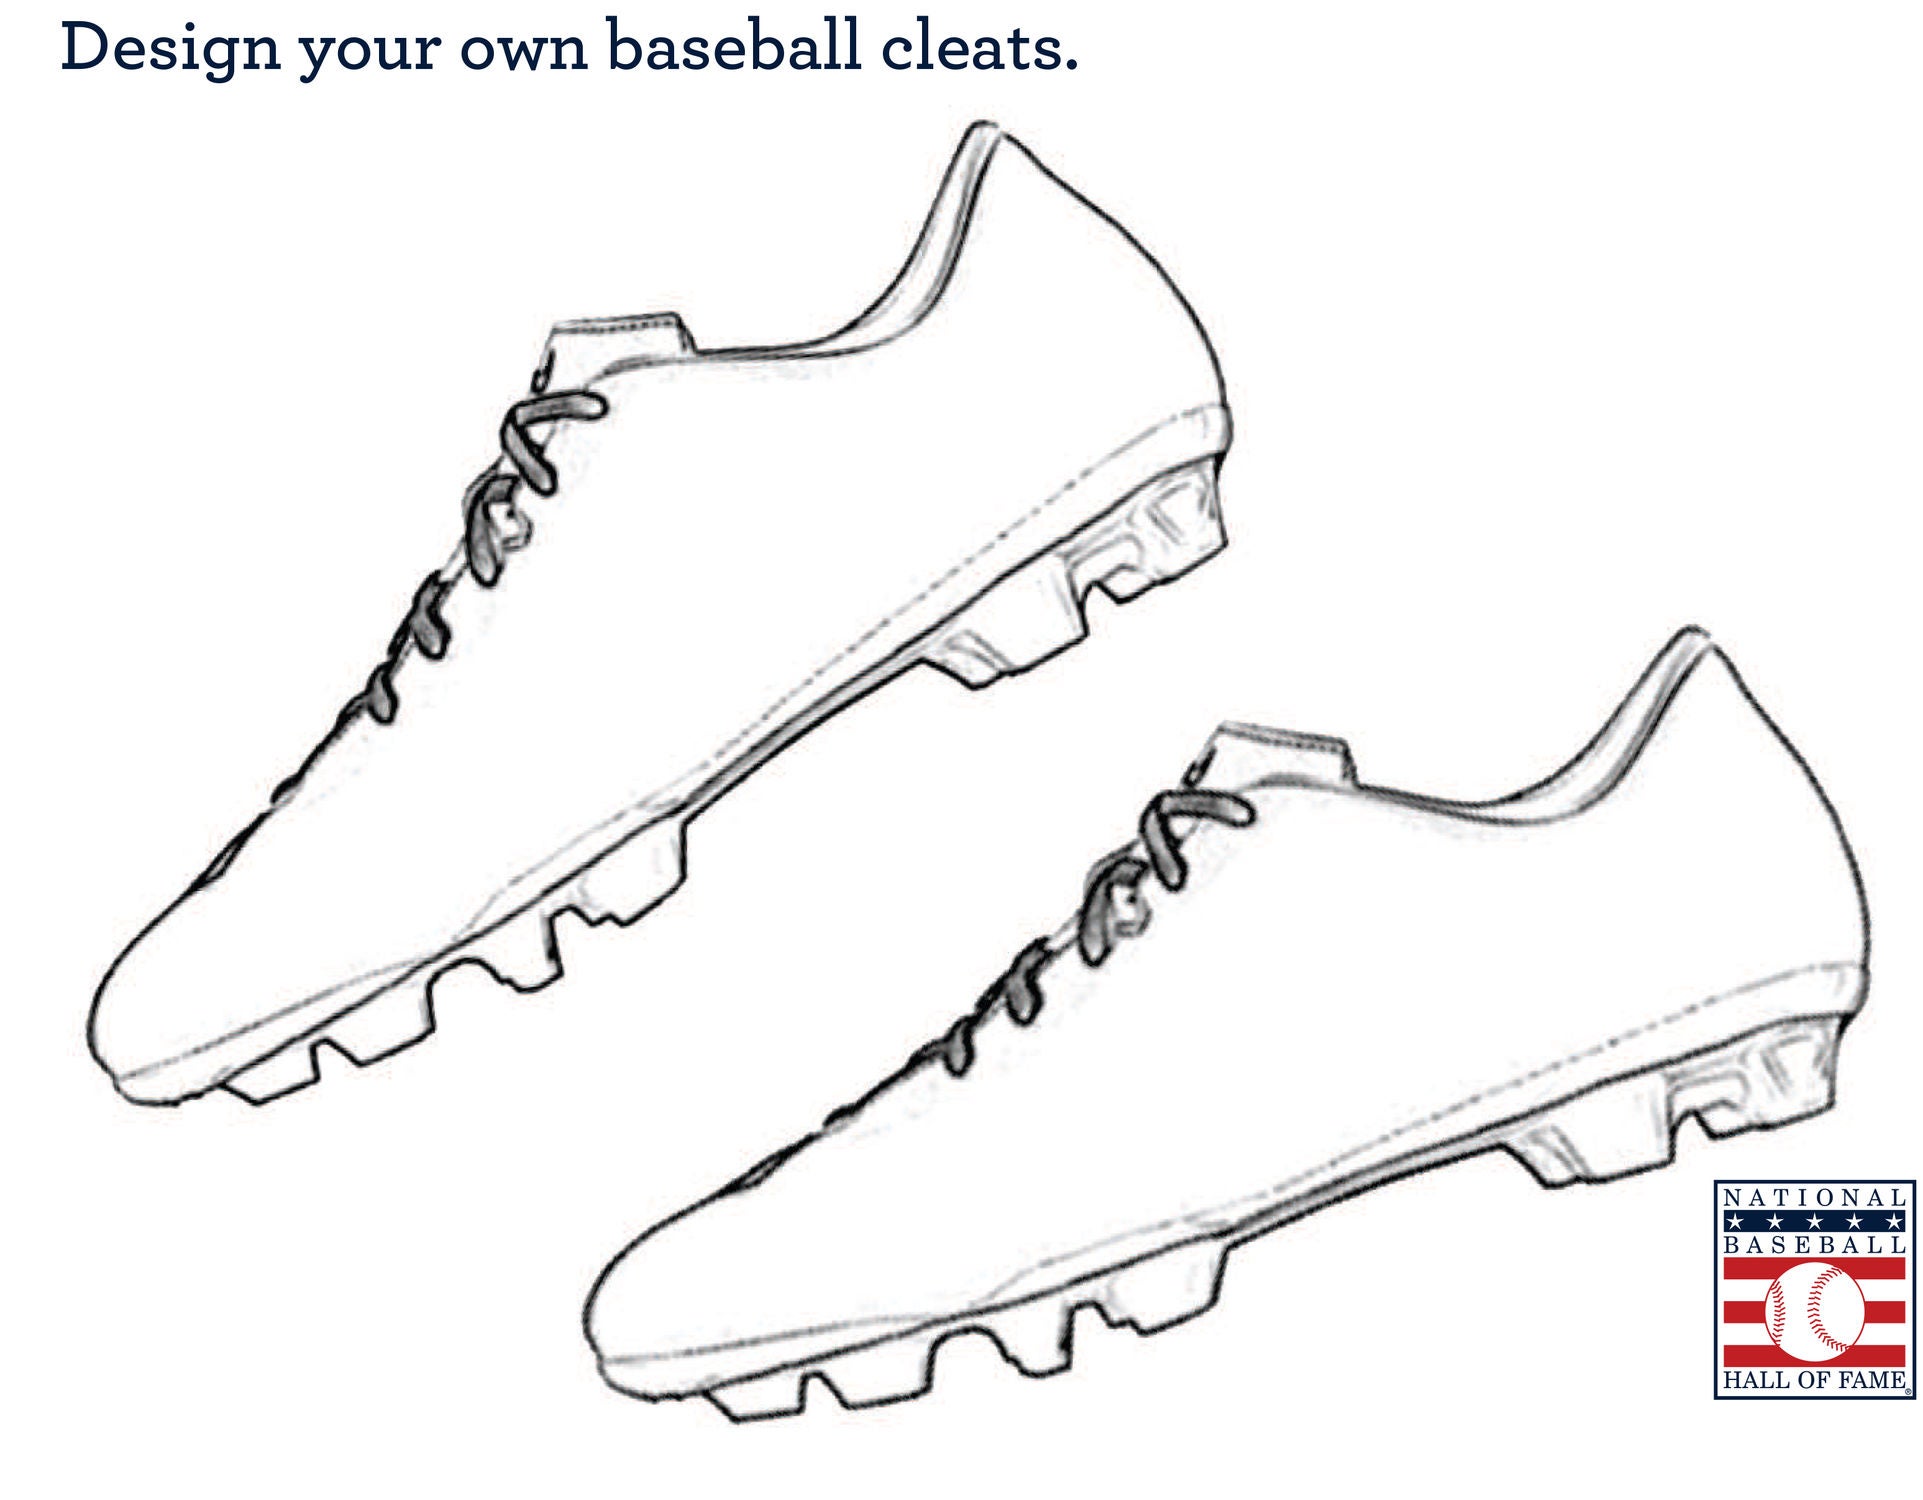 Make Your Own Cleats Online Sale, UP TO 